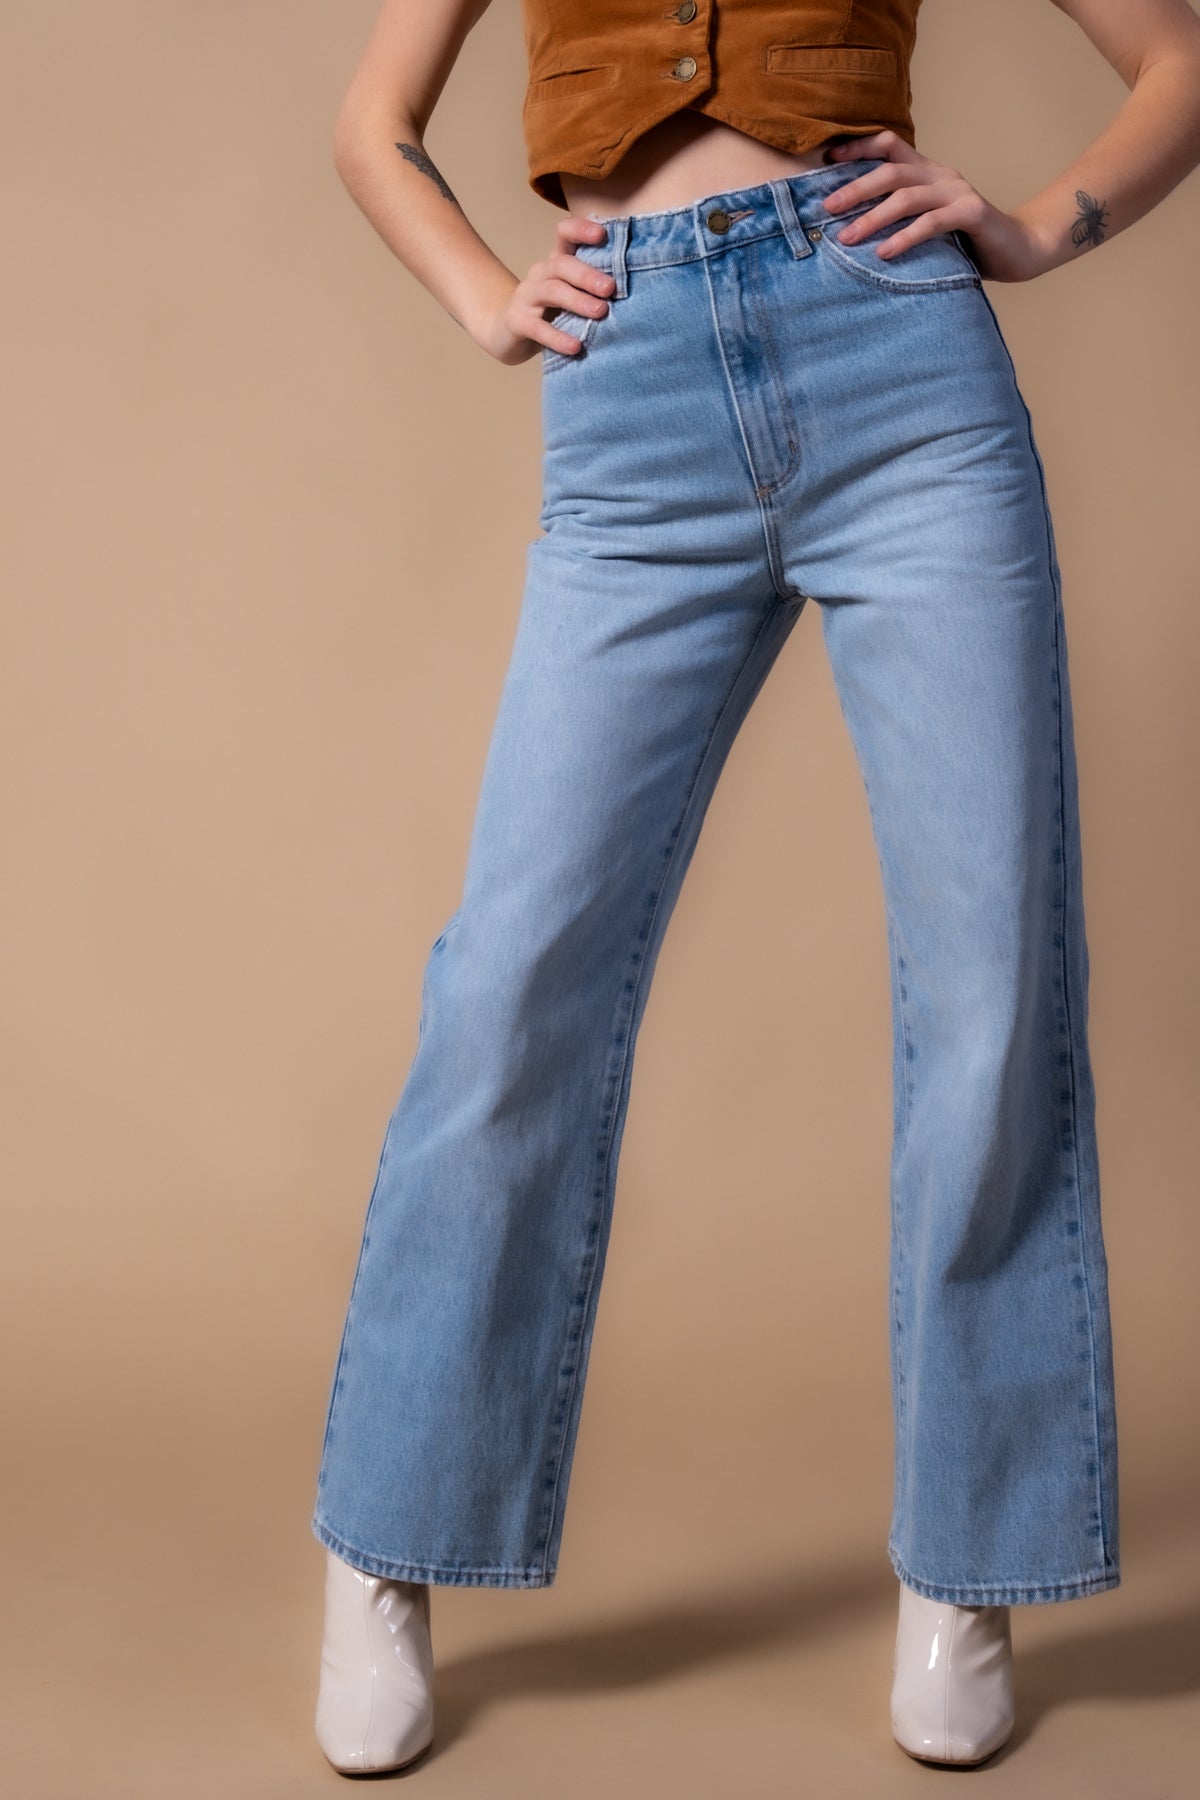 Rolla's Heidi Ankle Jeans - Old Stone